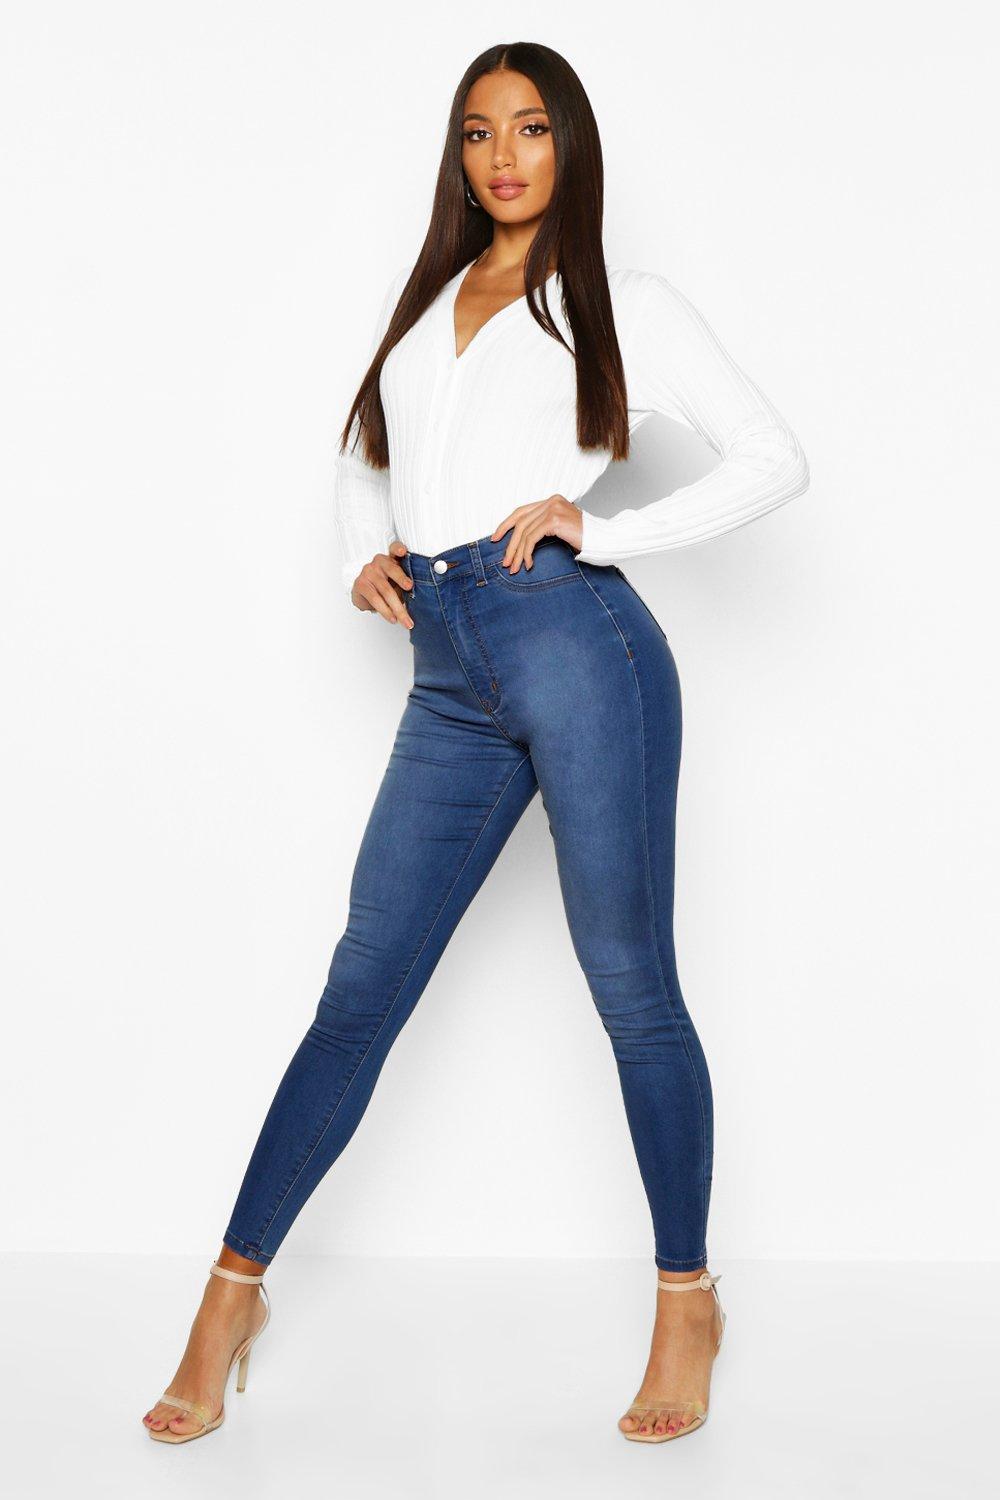 High Waisted Jeans for Women, Skinny Stretch Butt Lifting Denim Pants.